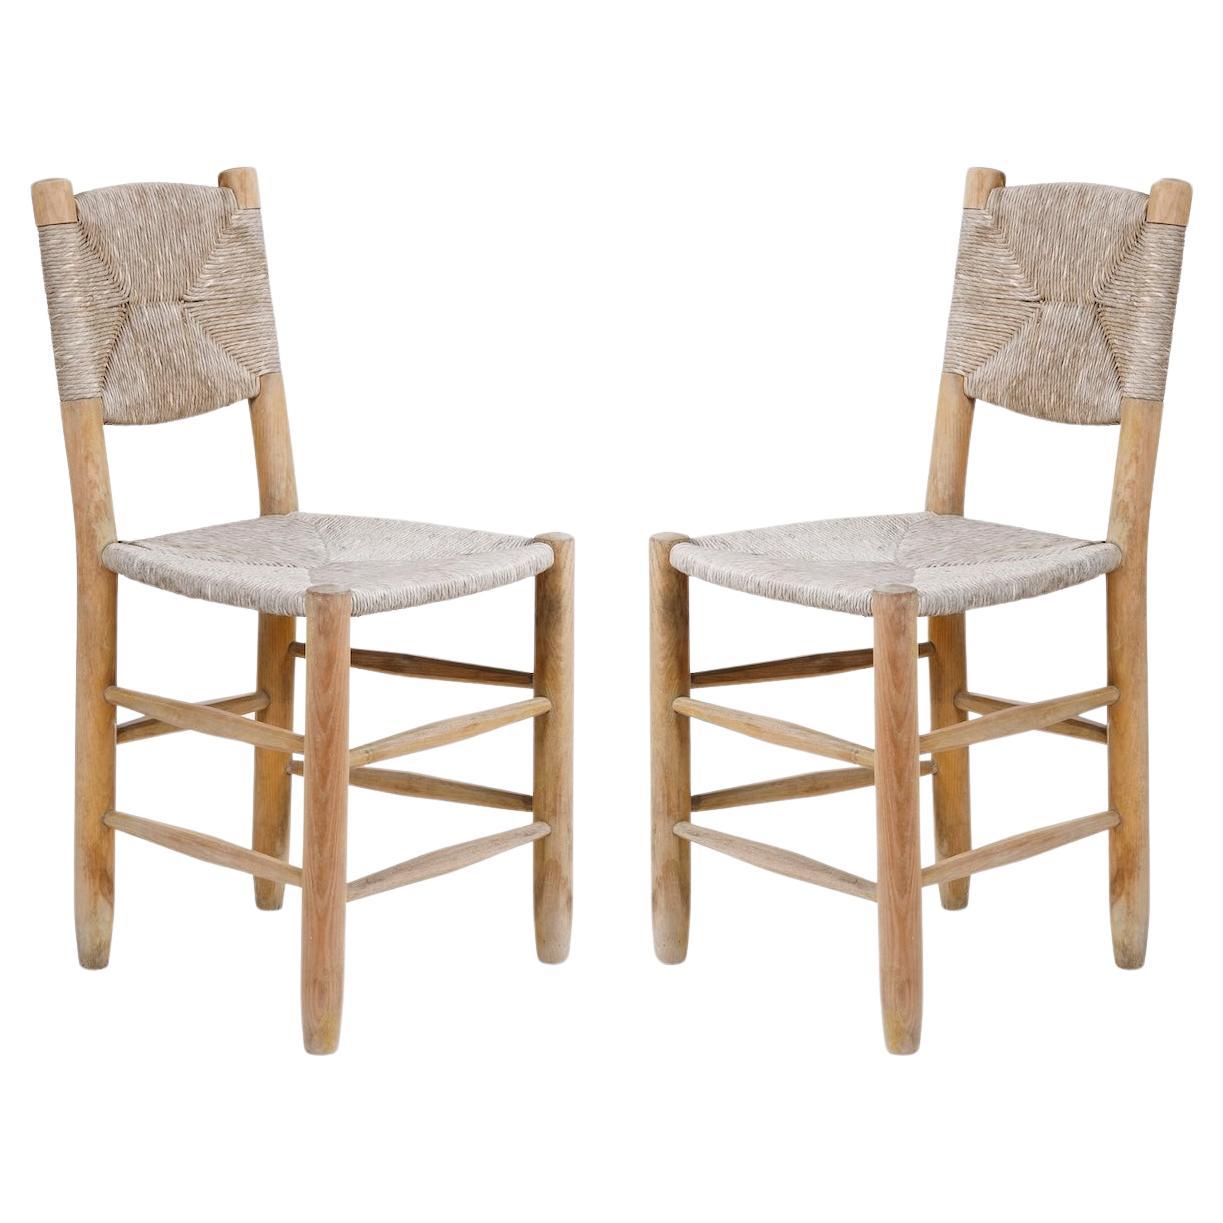 Pair of Bauche chairs by Charlotte Perriand, France, 1950s